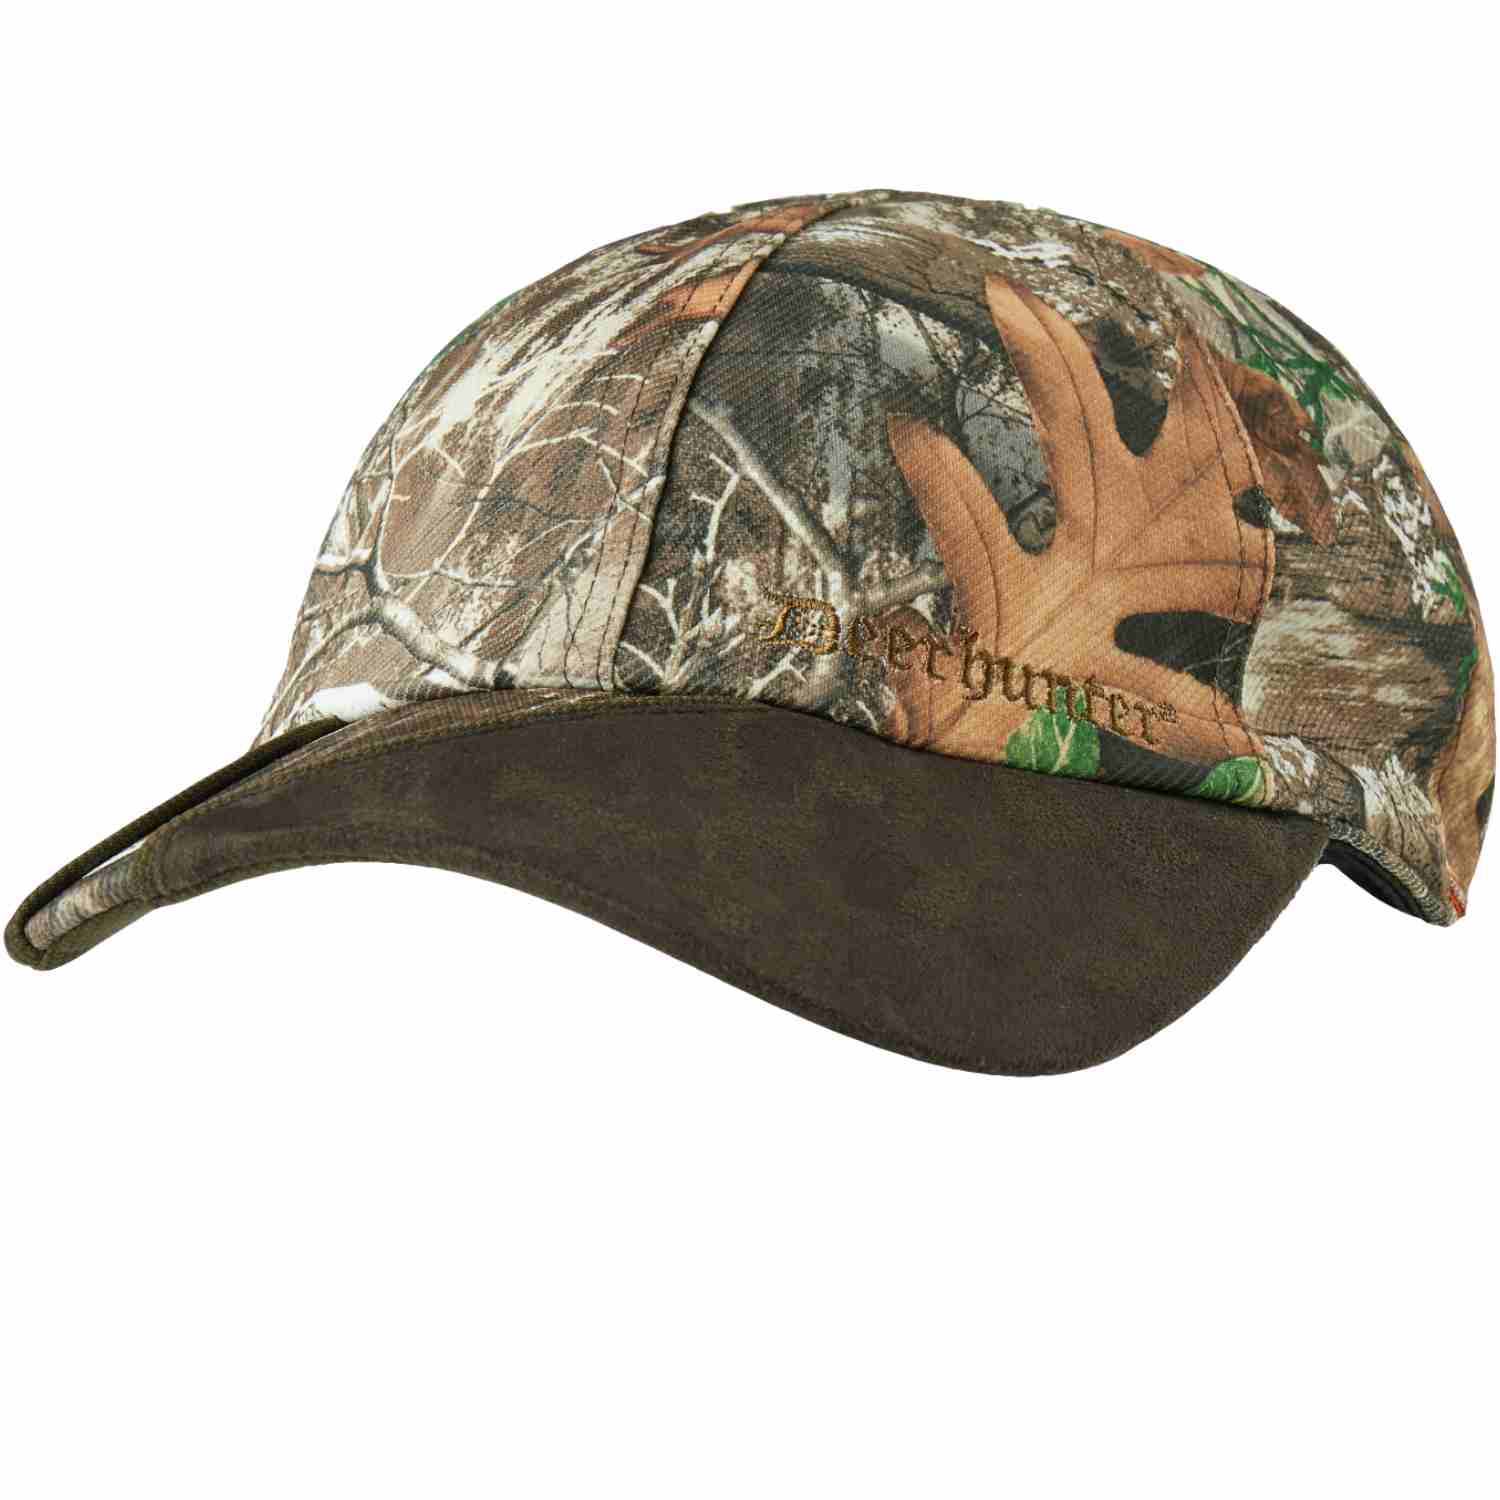 Deerhunter Muflon Cap with Safety - Hollands Country Clothing 